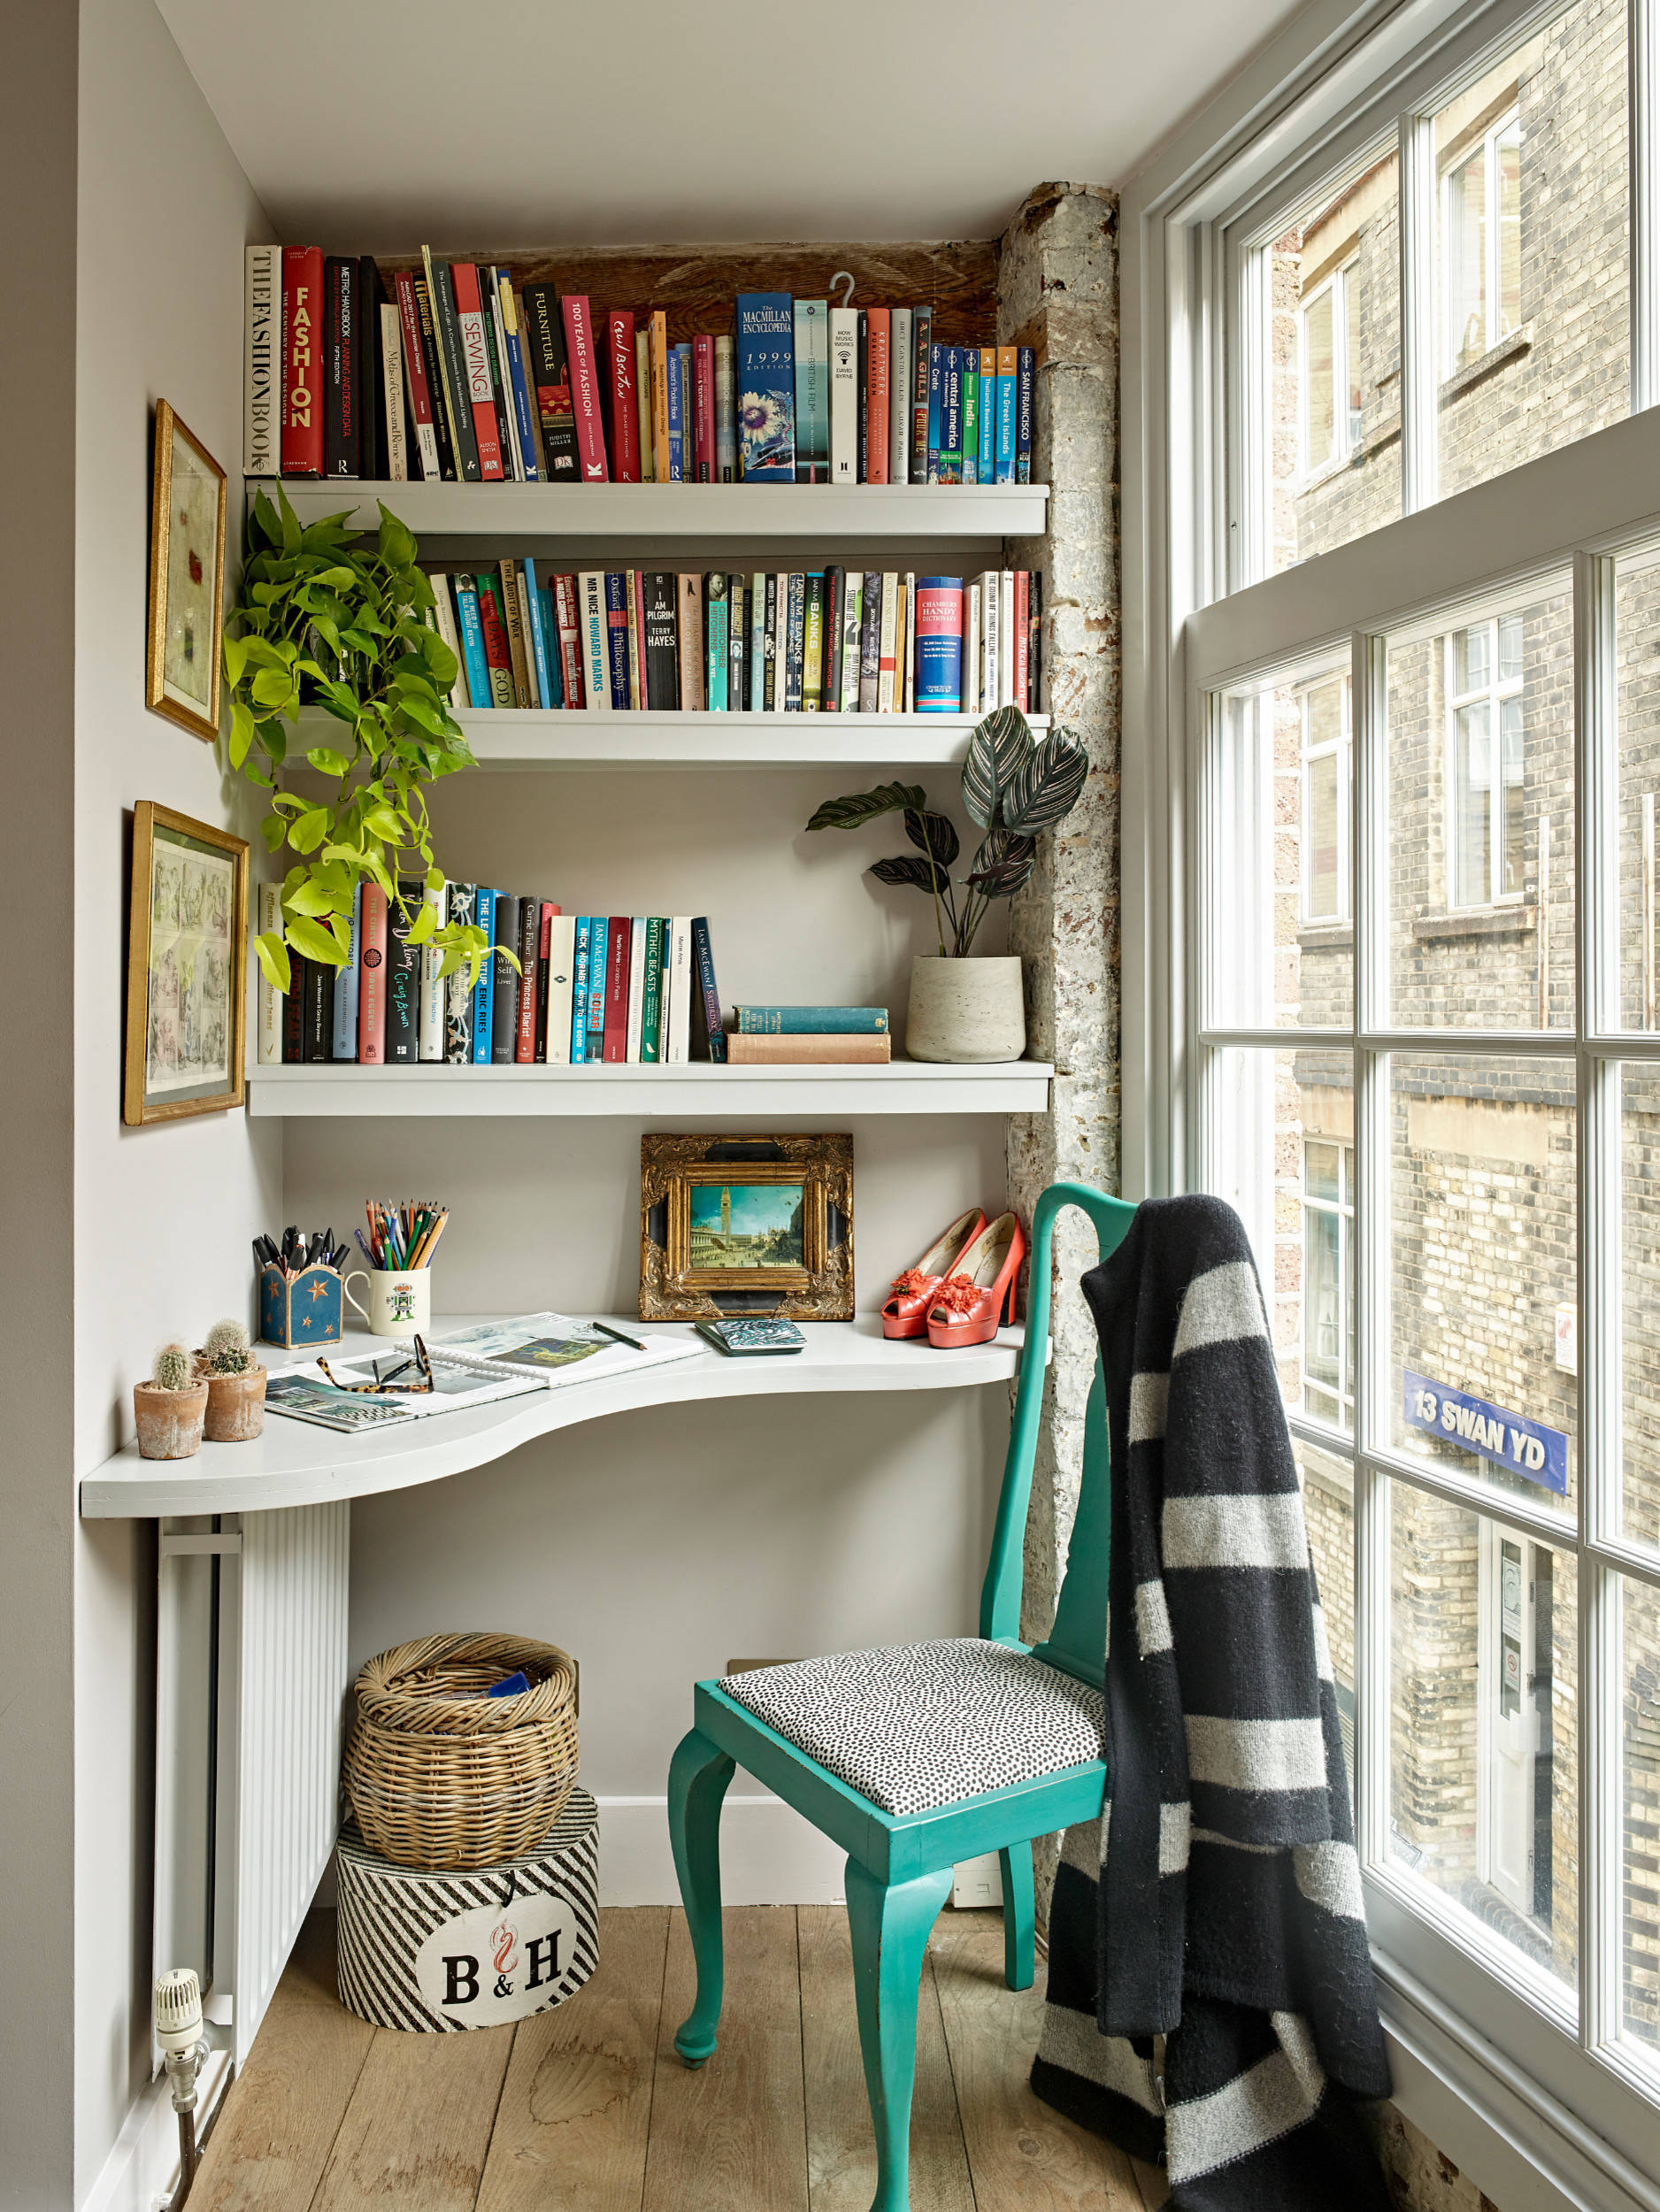 Home Library Ideas For Small Spaces / Cozy Reading Room Ideas 15